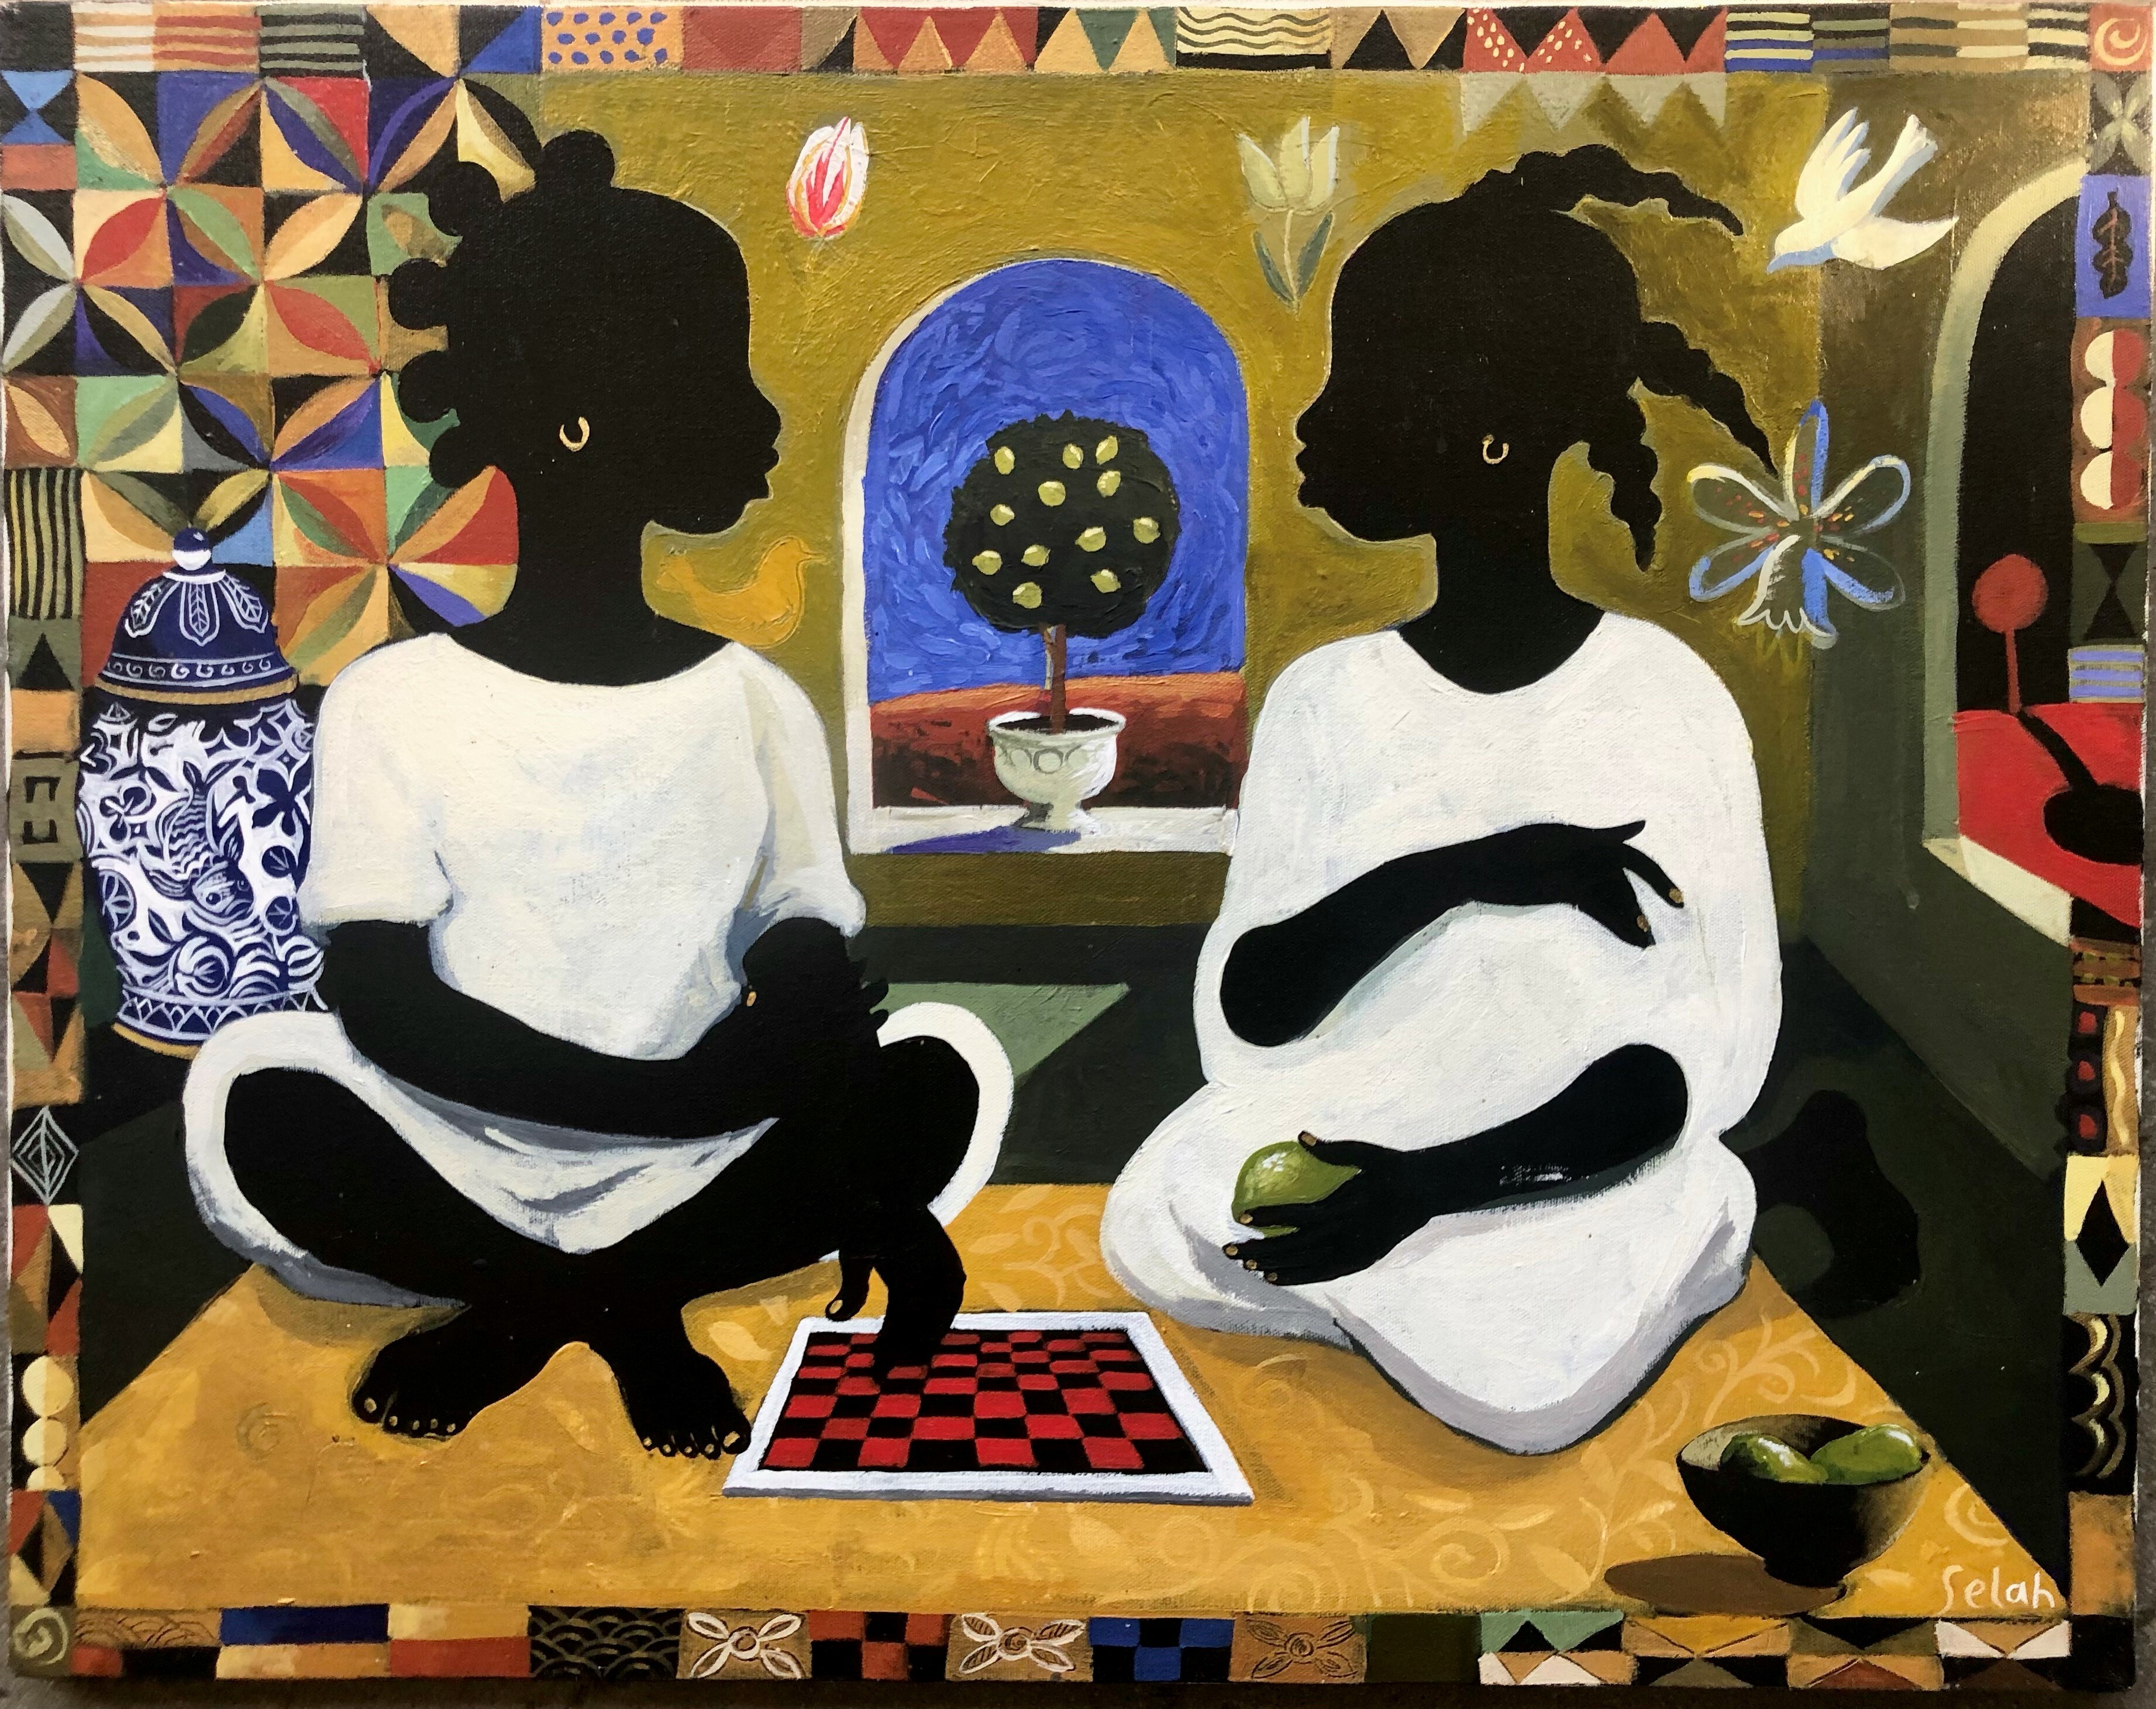 Two dark figures in white shifts play checkers in a sandstone-colored room with bright art on the walls and a tree outside